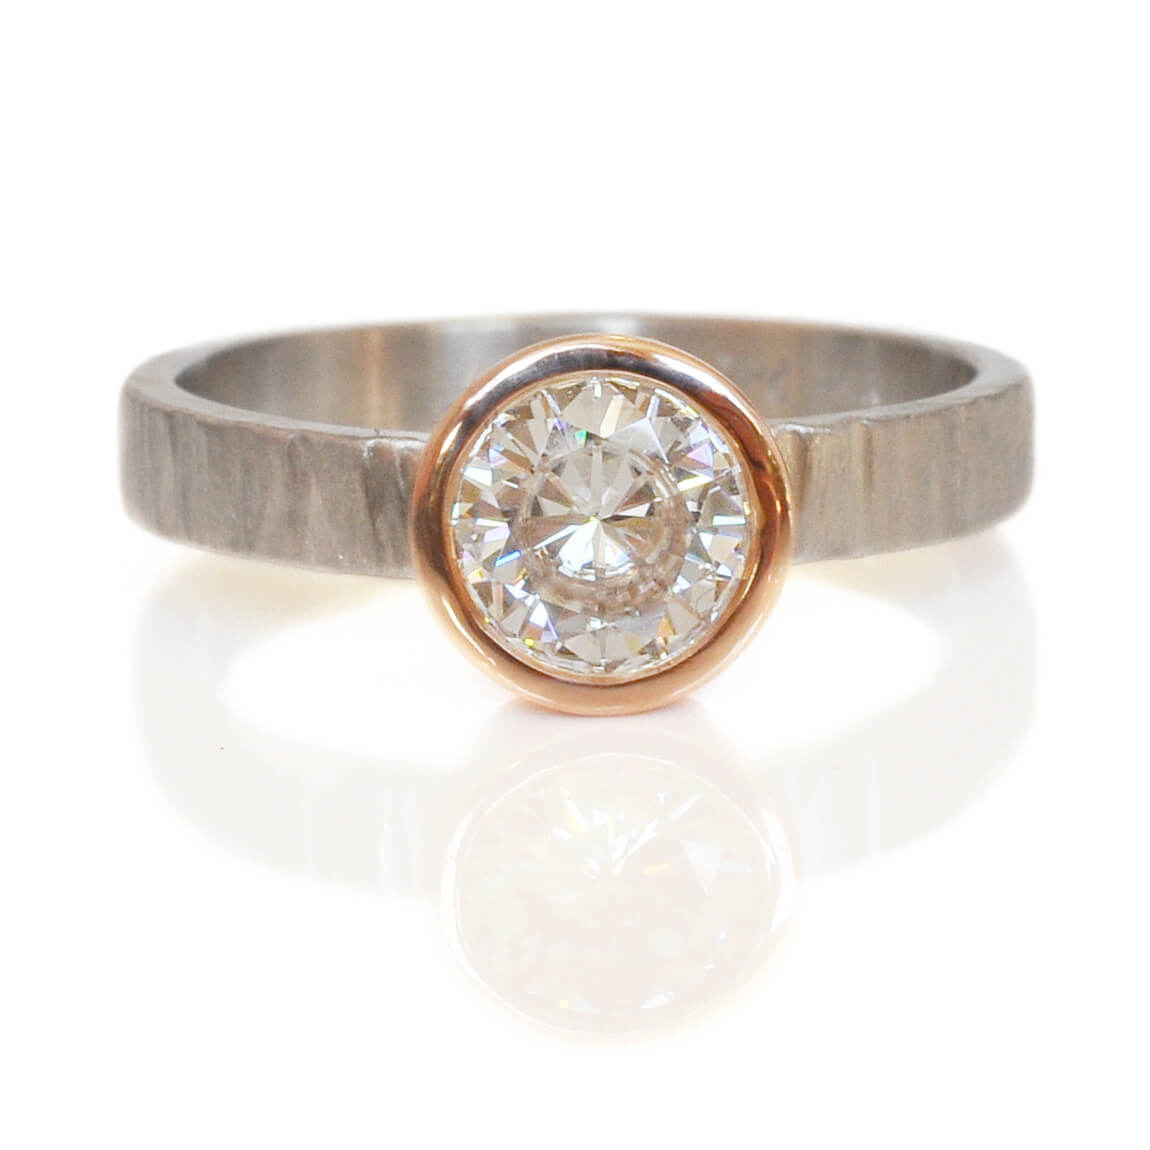 Moissanite engagement ring in red gold on a hammered palladium band. Handmade by EC Design Jewelry in Minneapolis, MN using recycled metal and conflict-free stone.